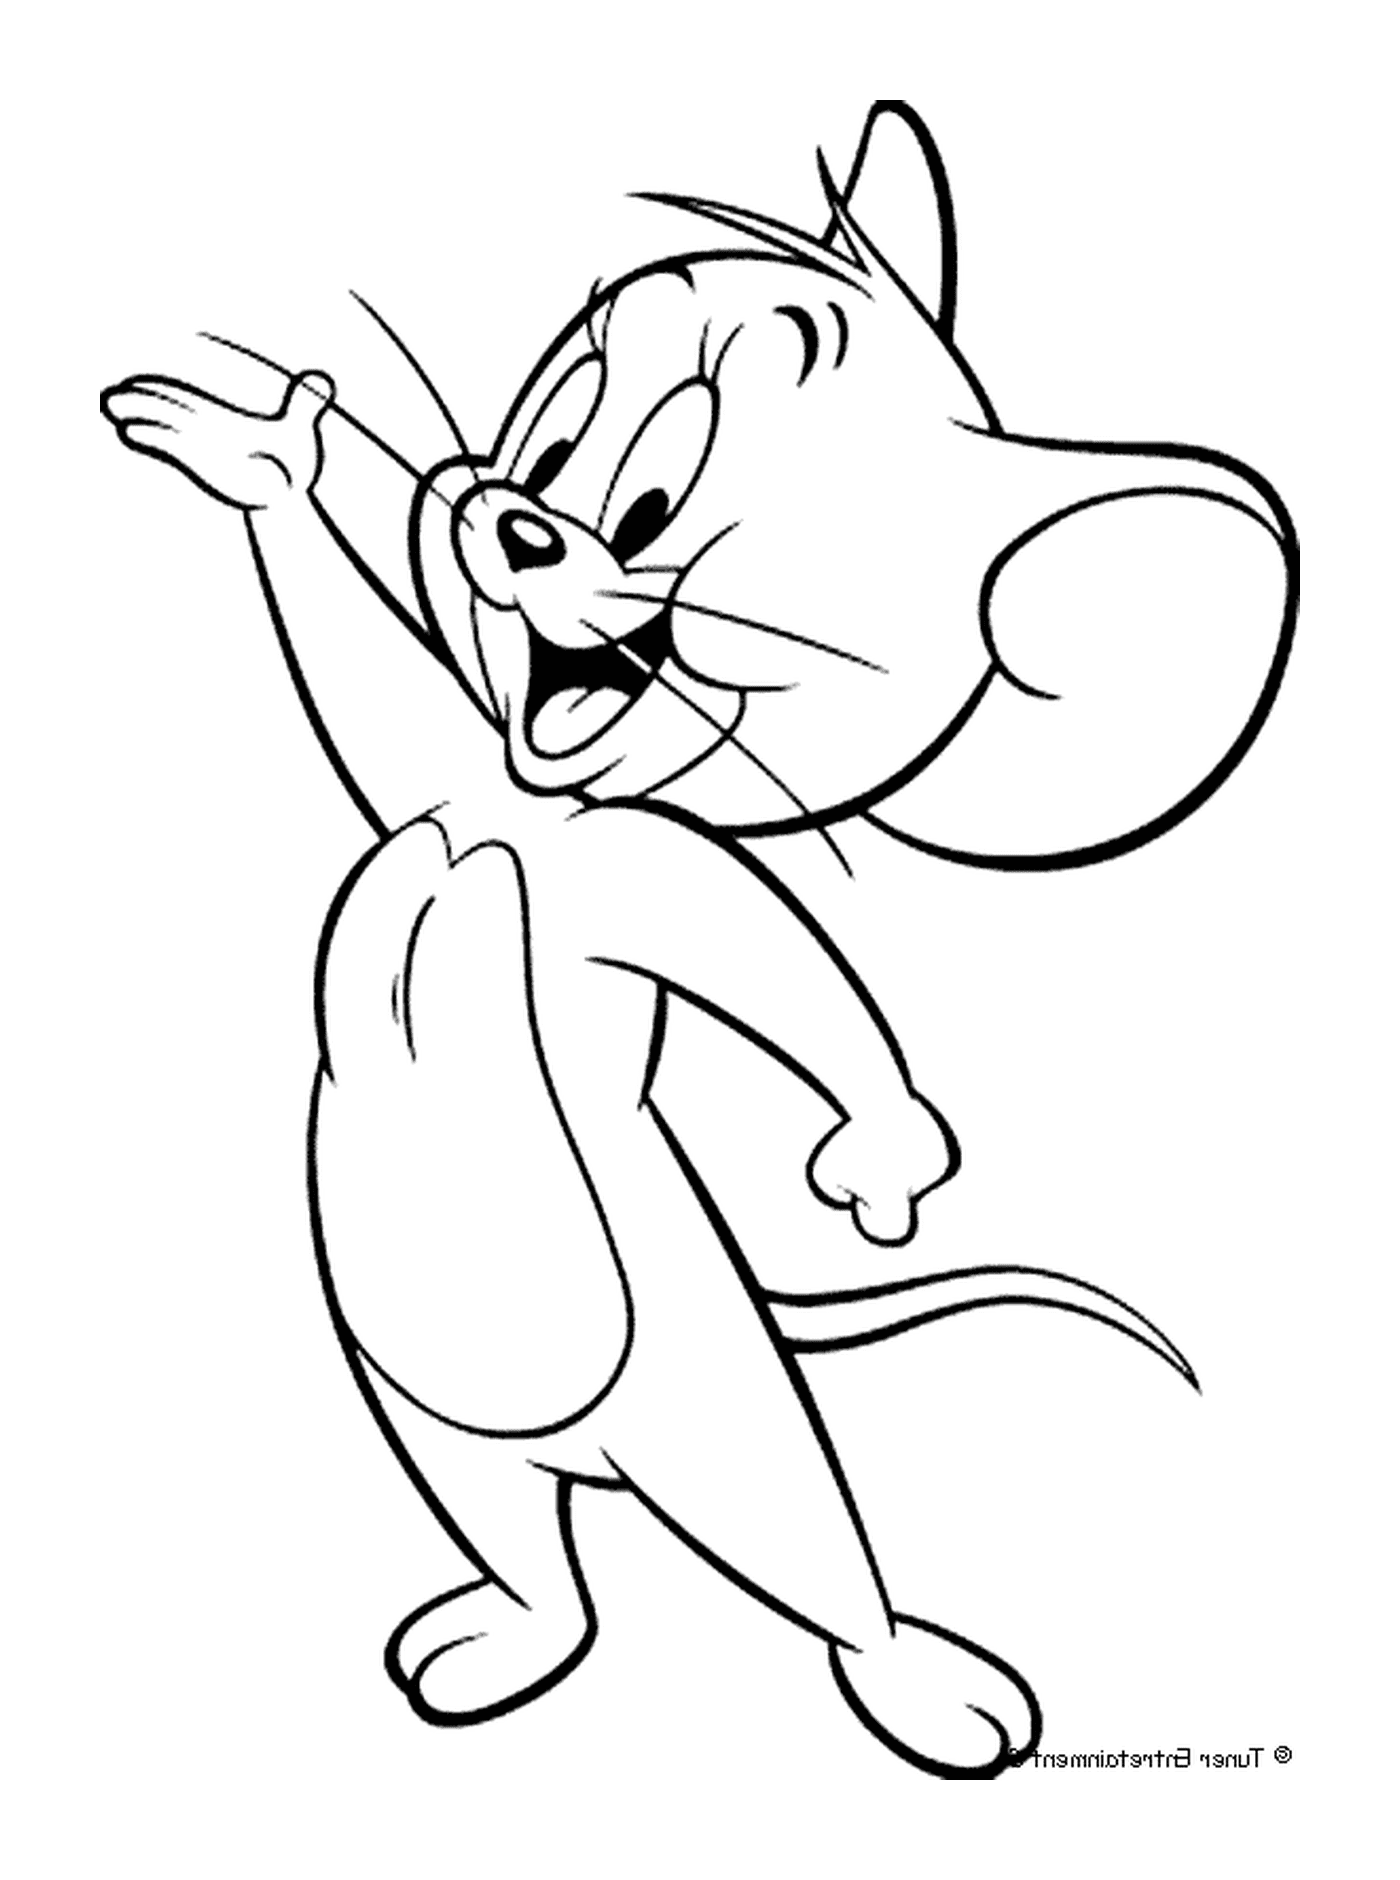  Jerry the mouse 